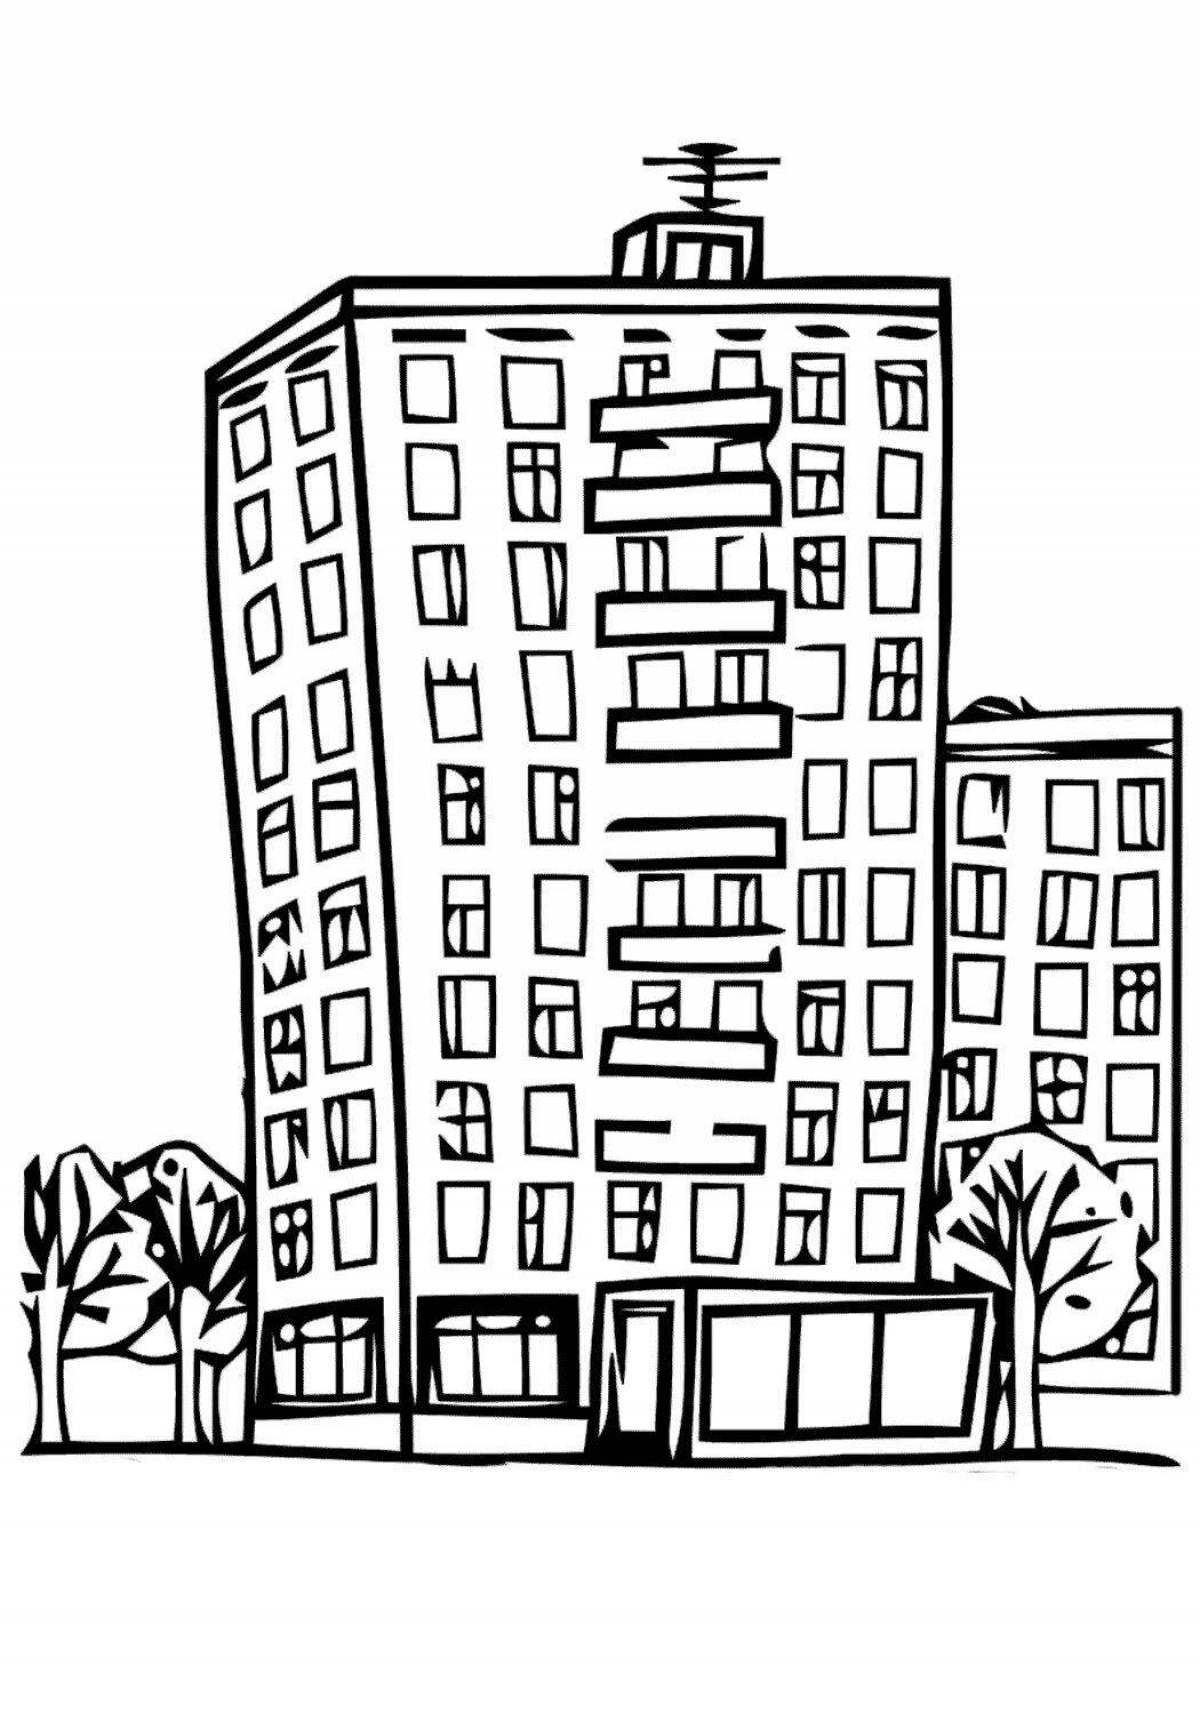 Impressive high-rise buildings coloring pages for kids